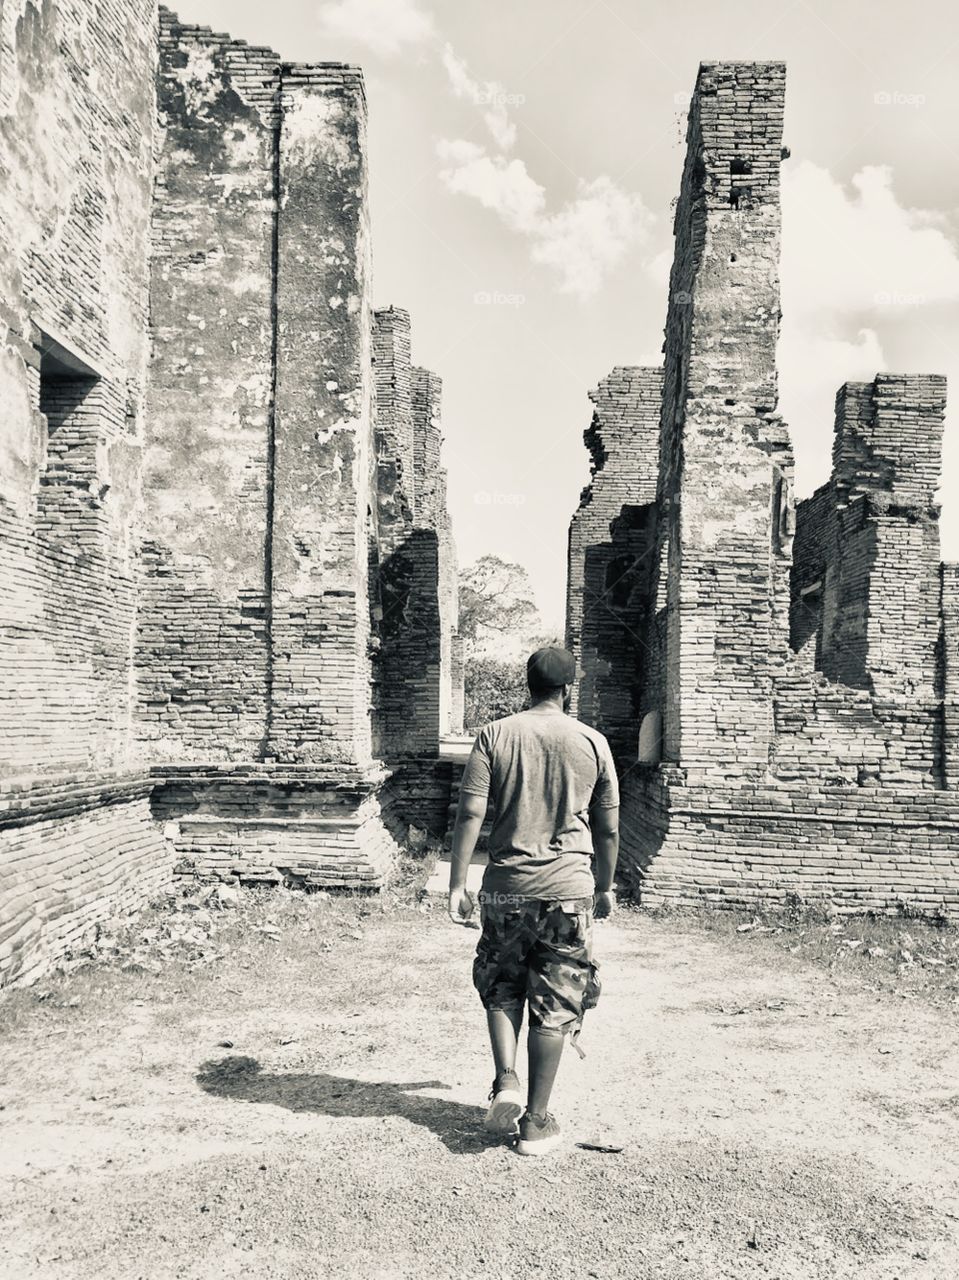 Man walking through what is left of the temple ruins in Ayutthaya Thailand 